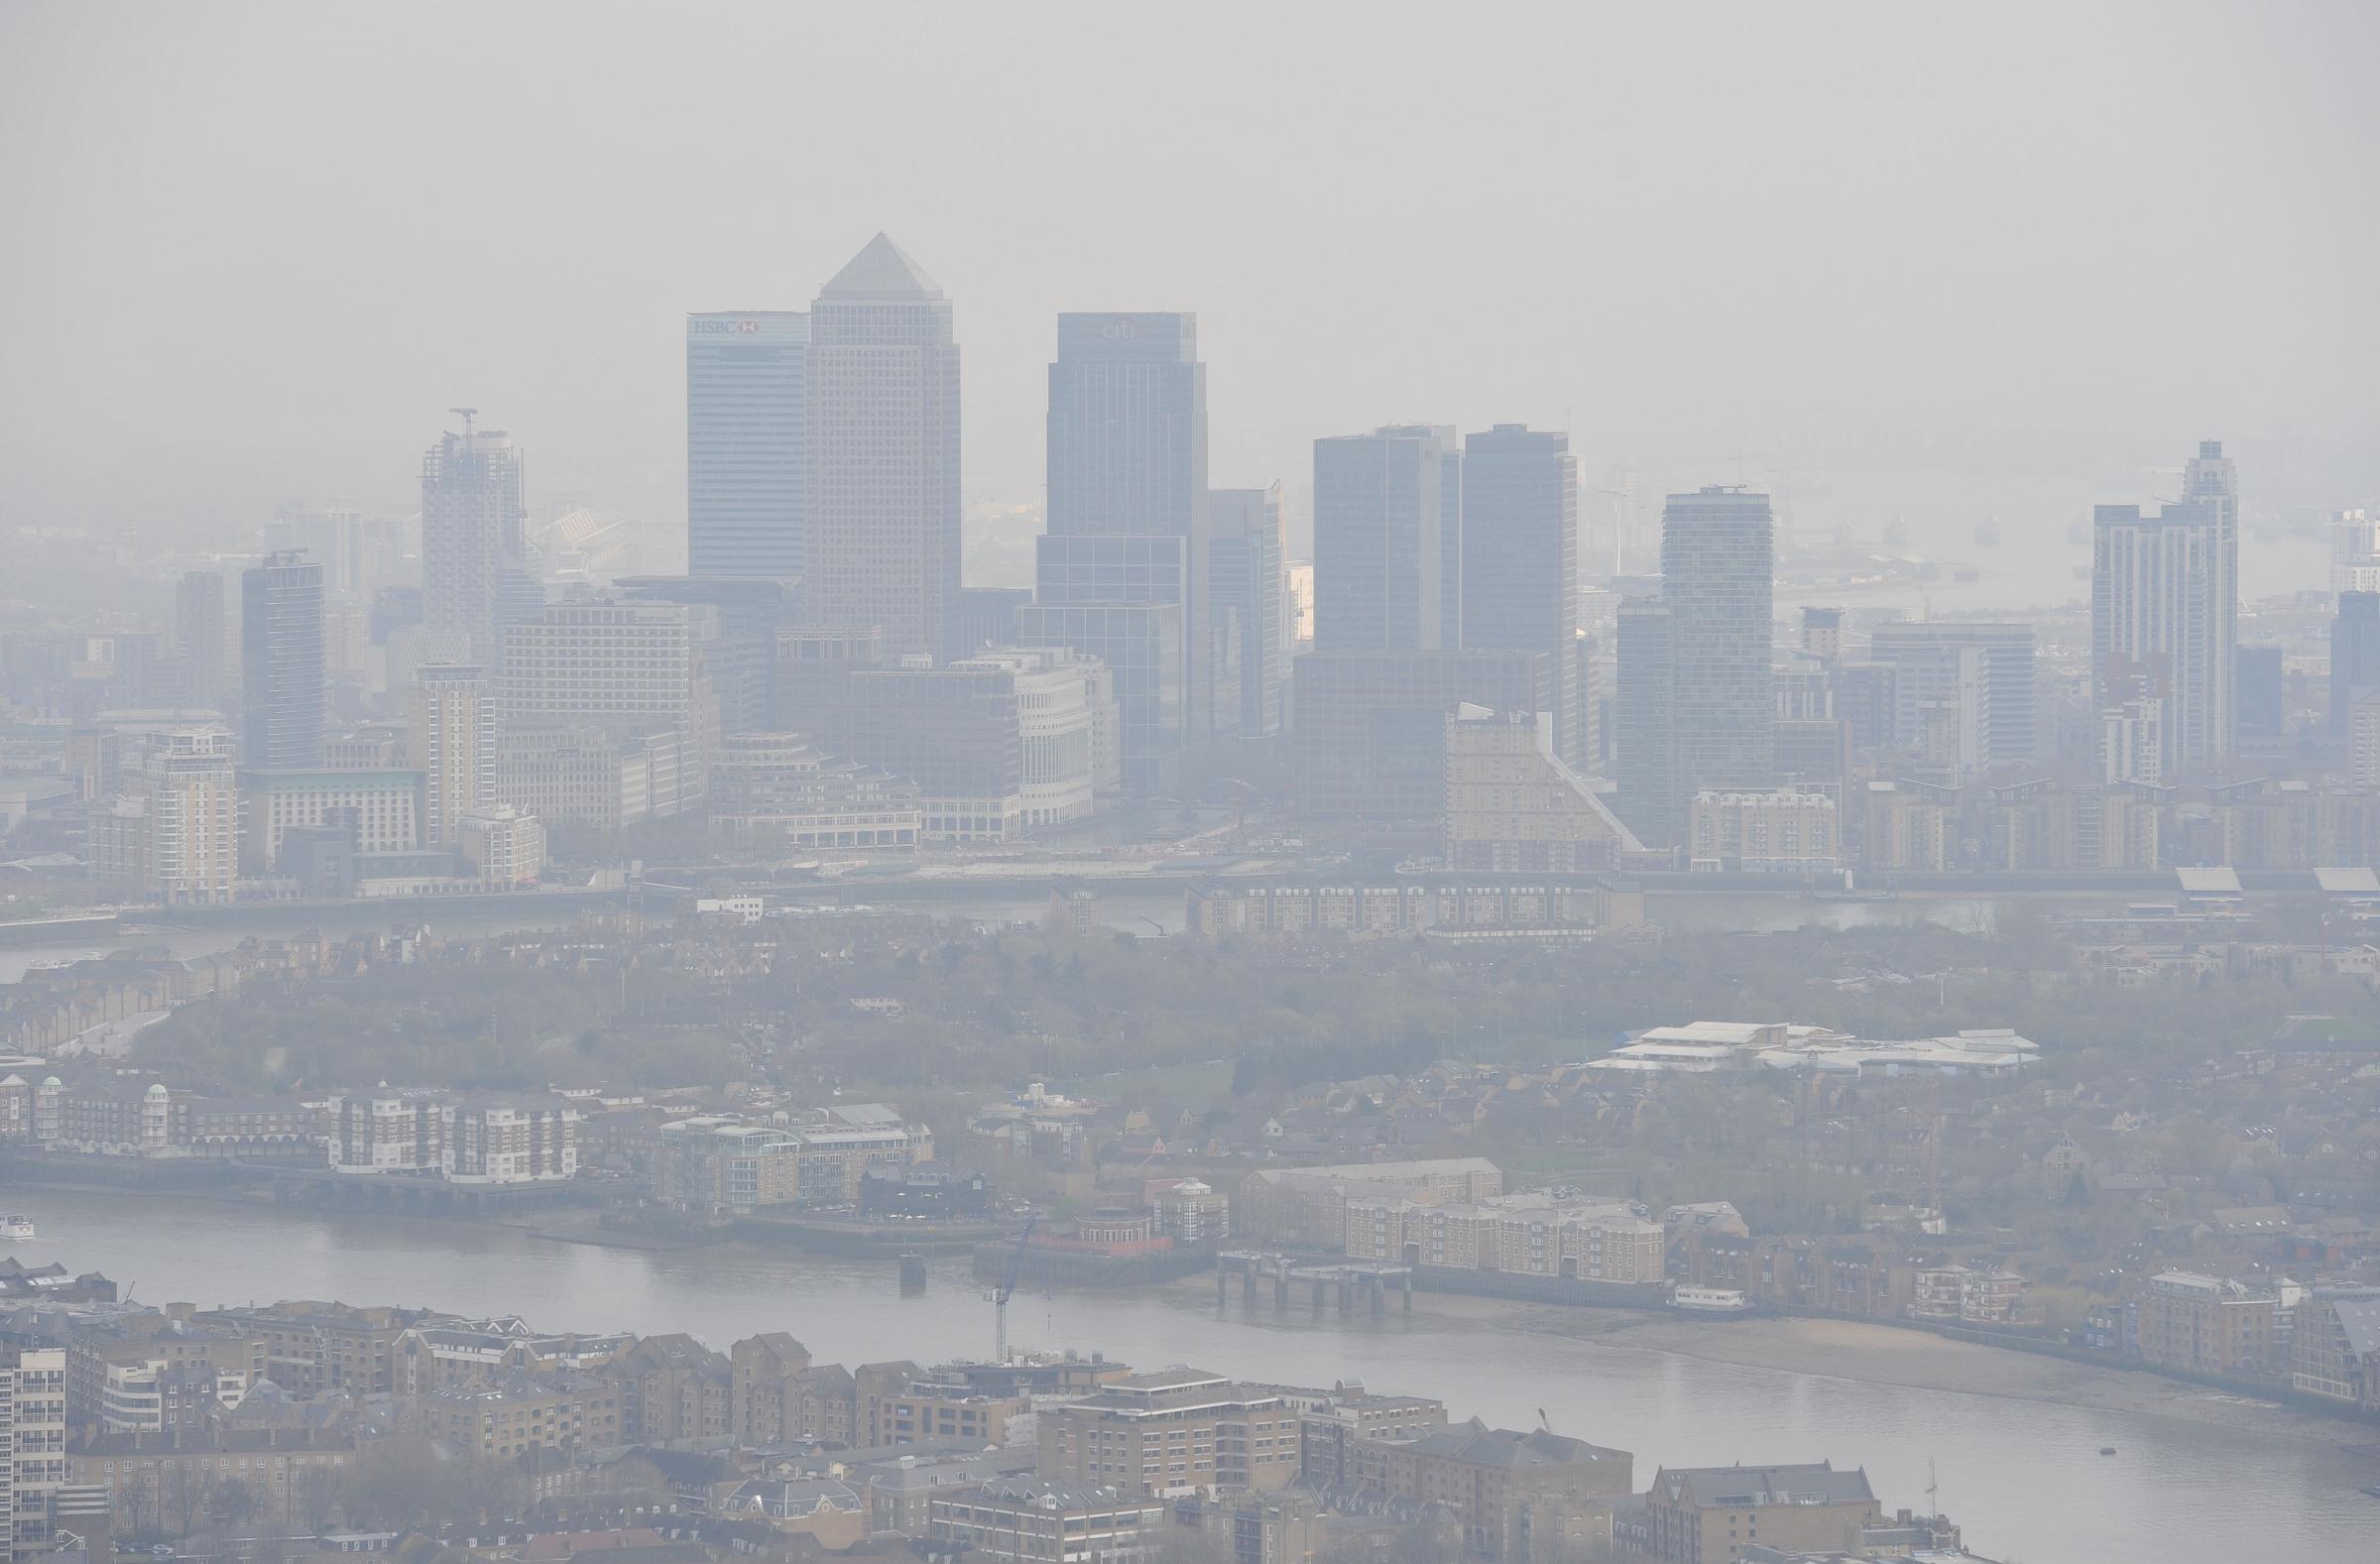 Poor air quality having impact on Londoners' health, research finds